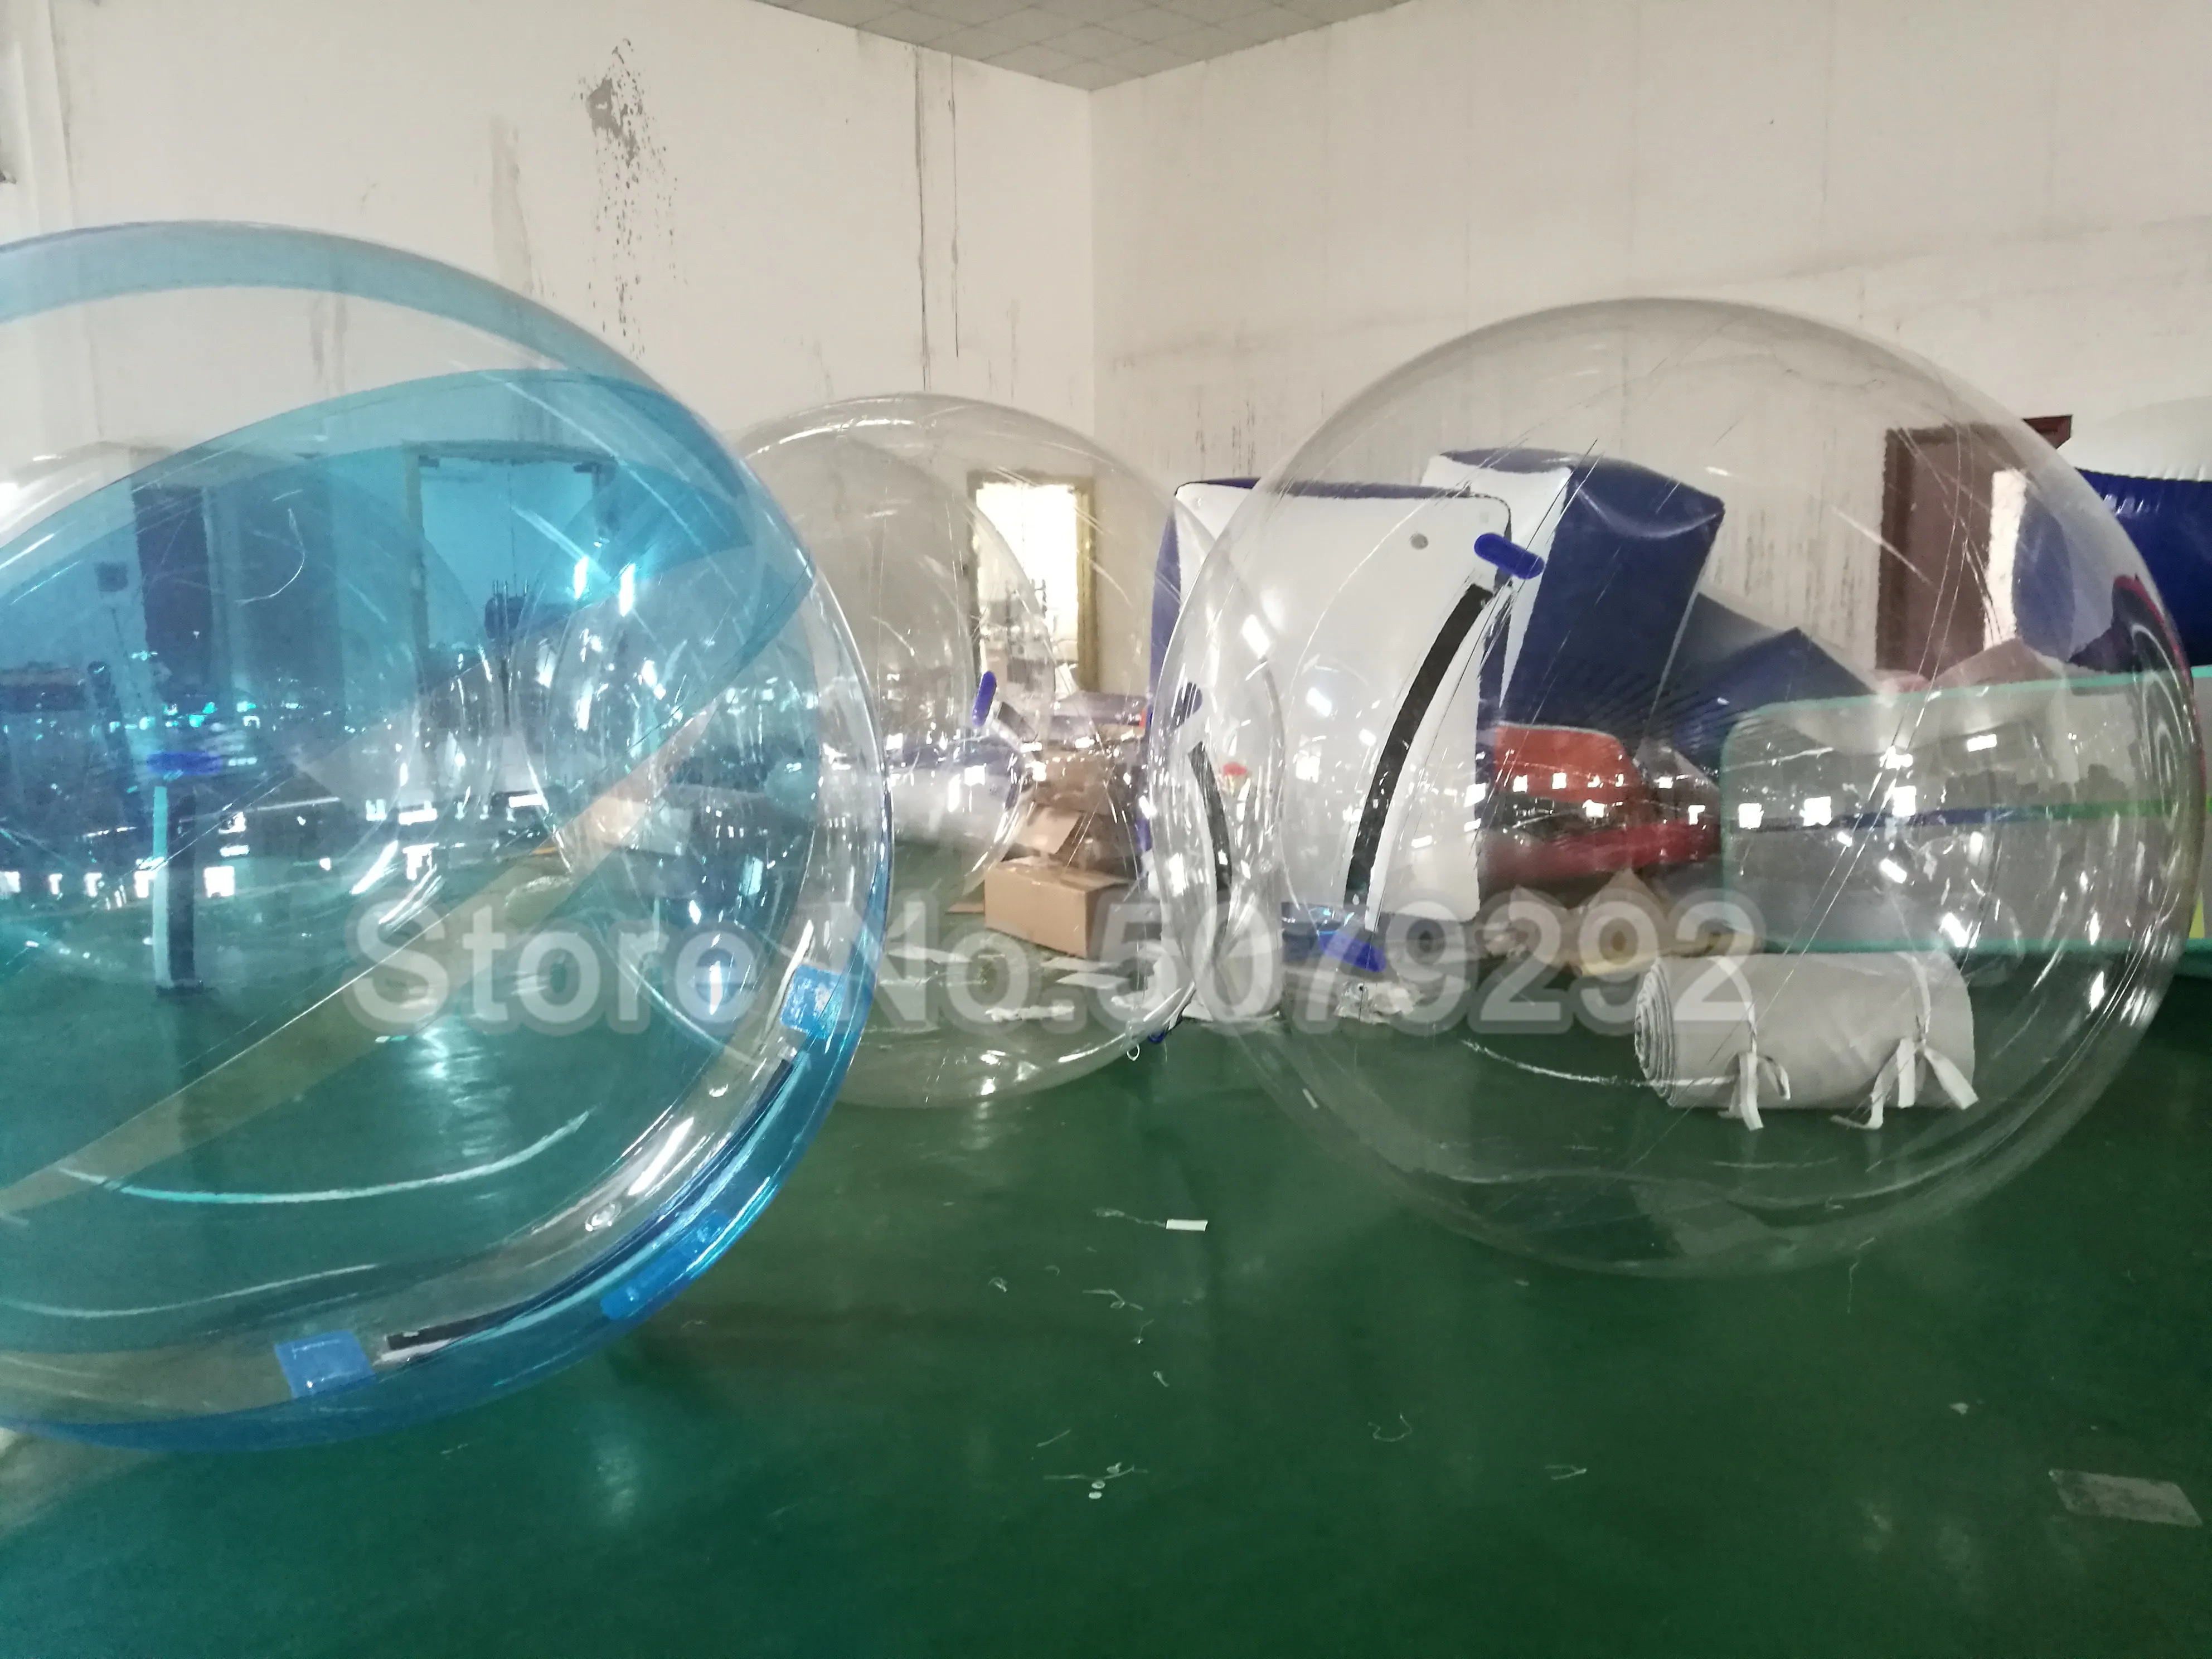 Promotion ! 1.5M Diameter Inflatable Water Zorb Ball For Pool/Lake/Sea Che - $372.30